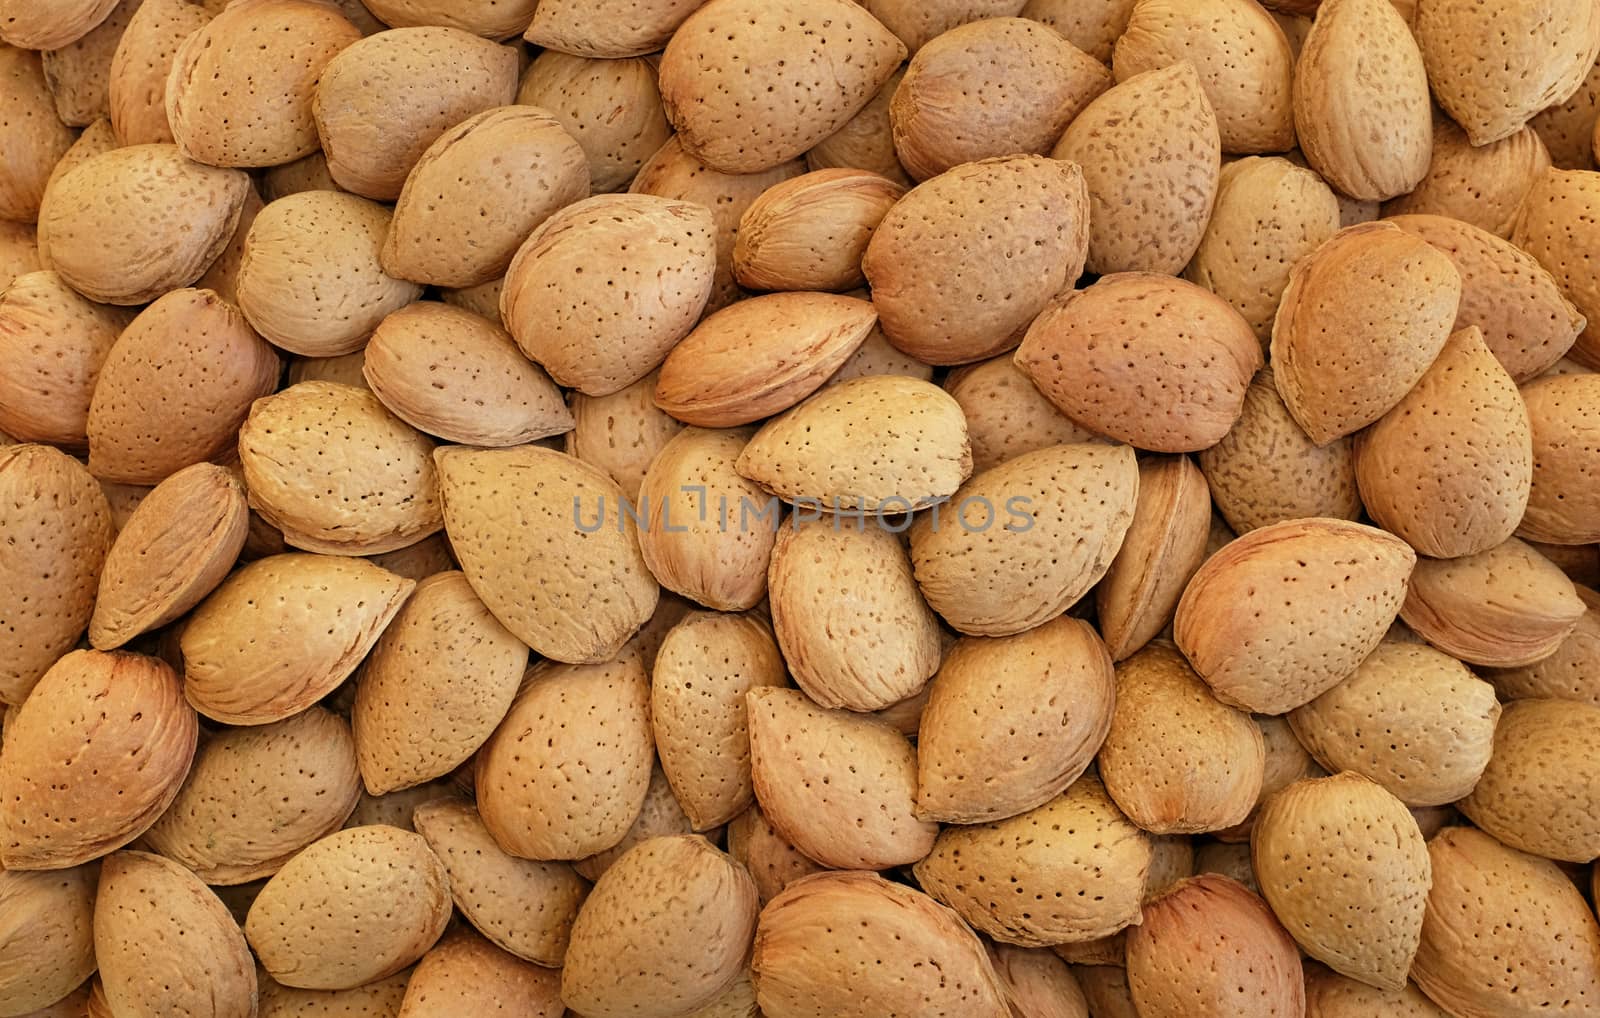 Whole almonds in shells as an abstract background texture